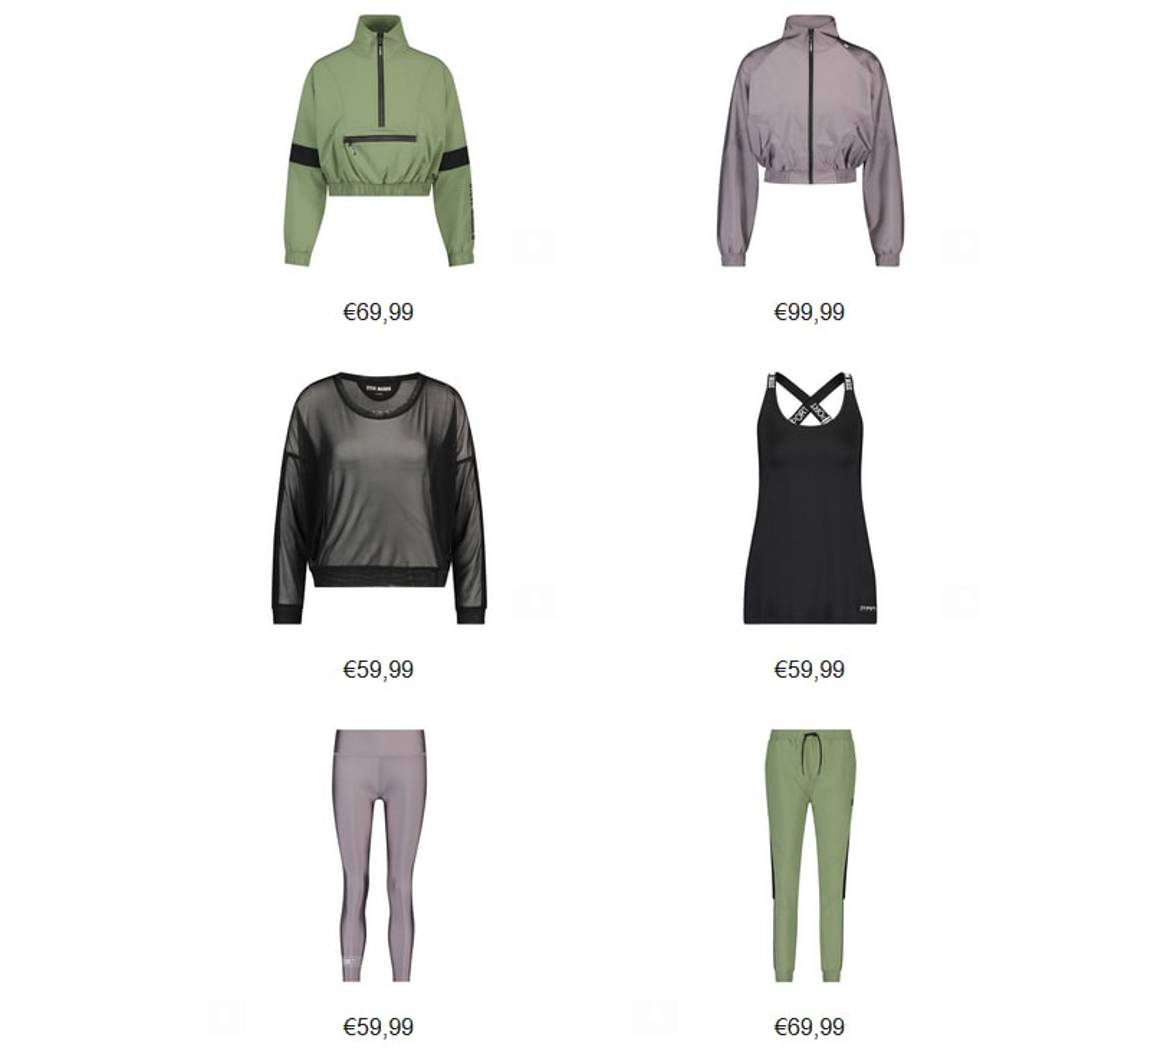 Steve Madden Apparel available online as from March 25th